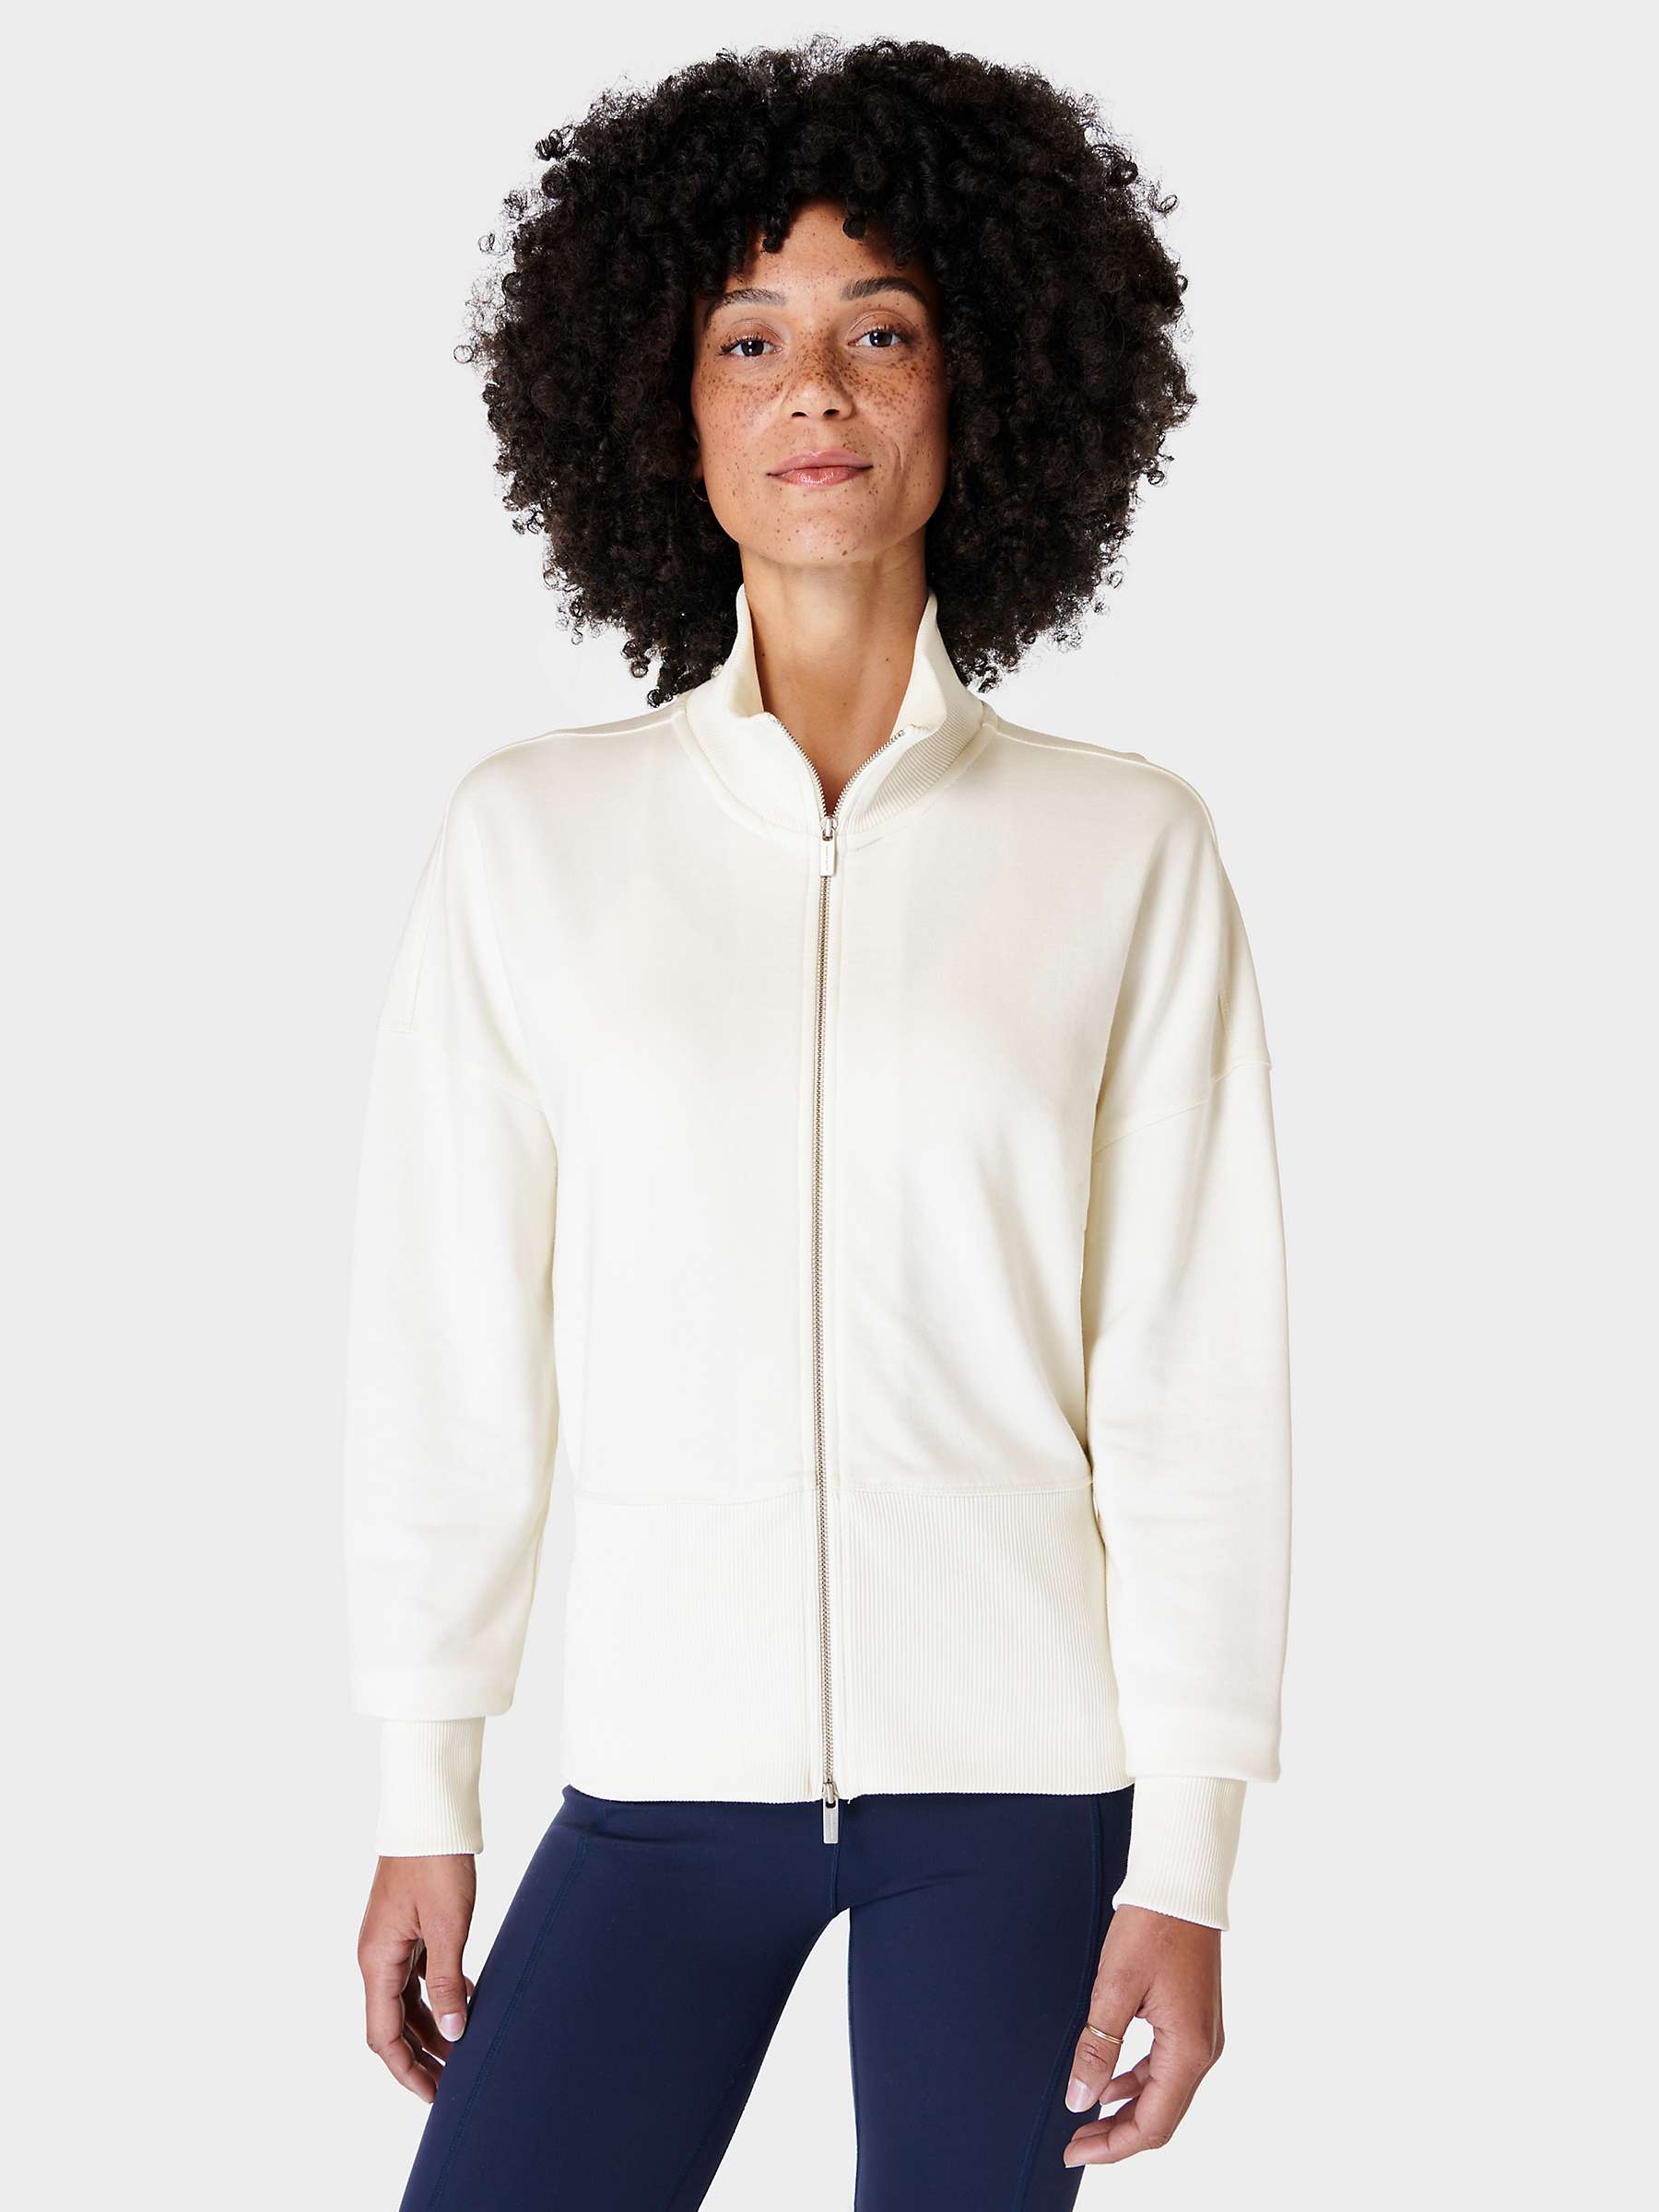 Buy Sweaty Betty After Class Zip Up Sweatshirt, Lily White Online at johnlewis.com